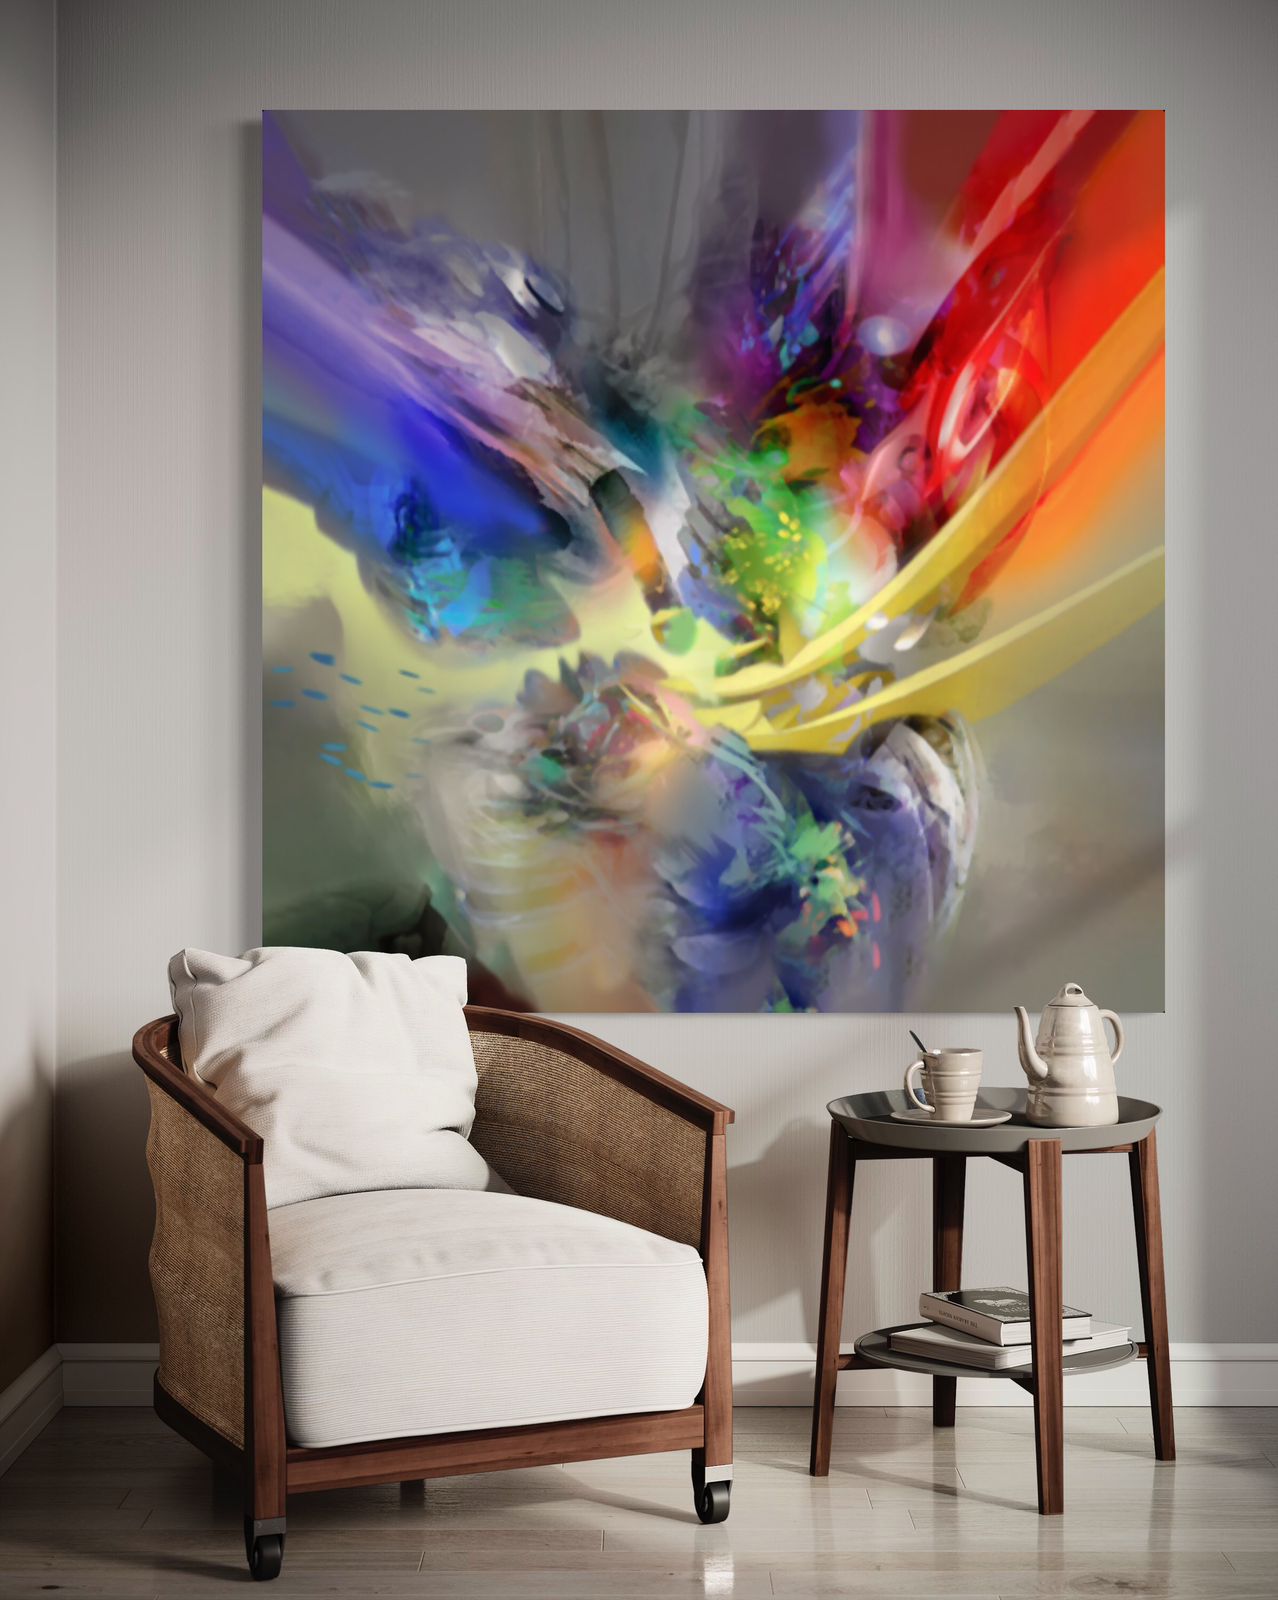 Espitia Fine Art - Limited Edition Original Painting - Abstract Painting - ALEGRIA - 59in x 59in | 150cm x 150cm - 2